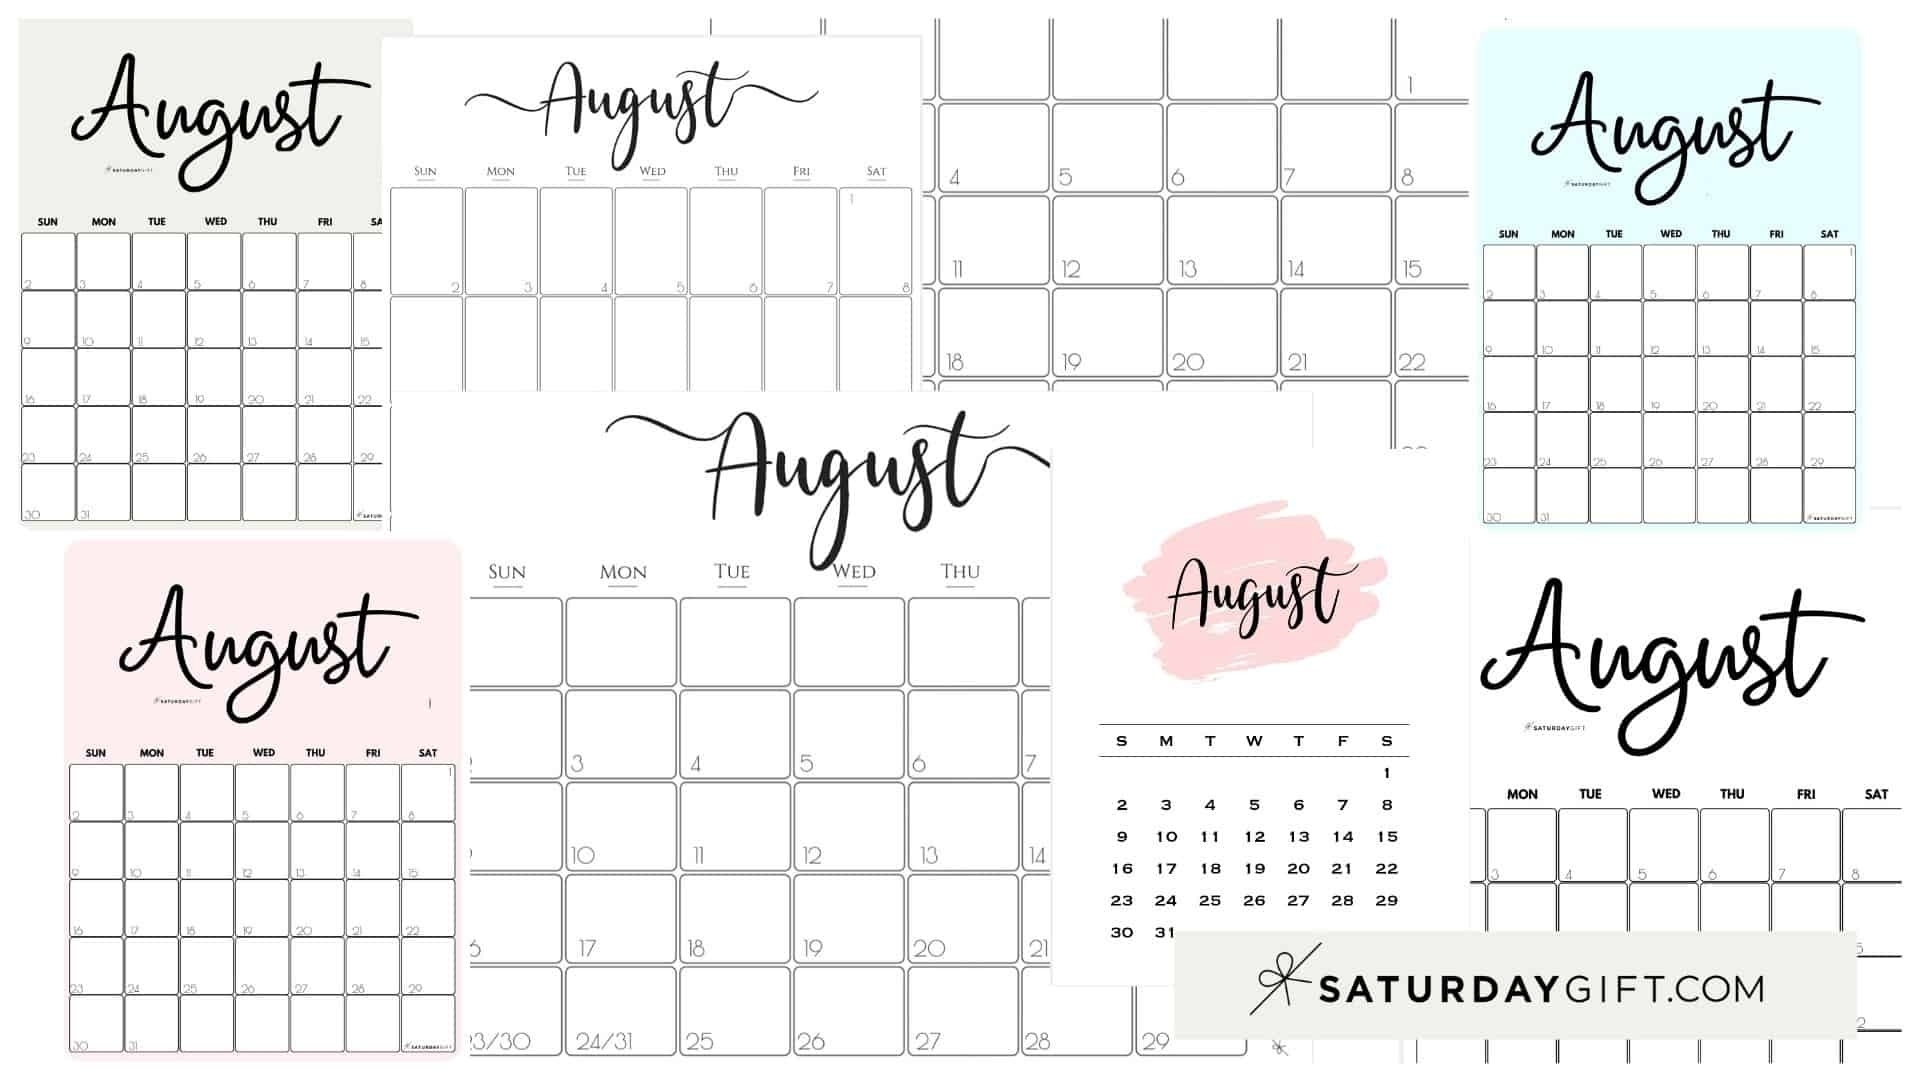 Free Printable Monthly Calendar August Sept 2021 Editable Week Start With Monday | Month August 2021 Calendar Starting Monday